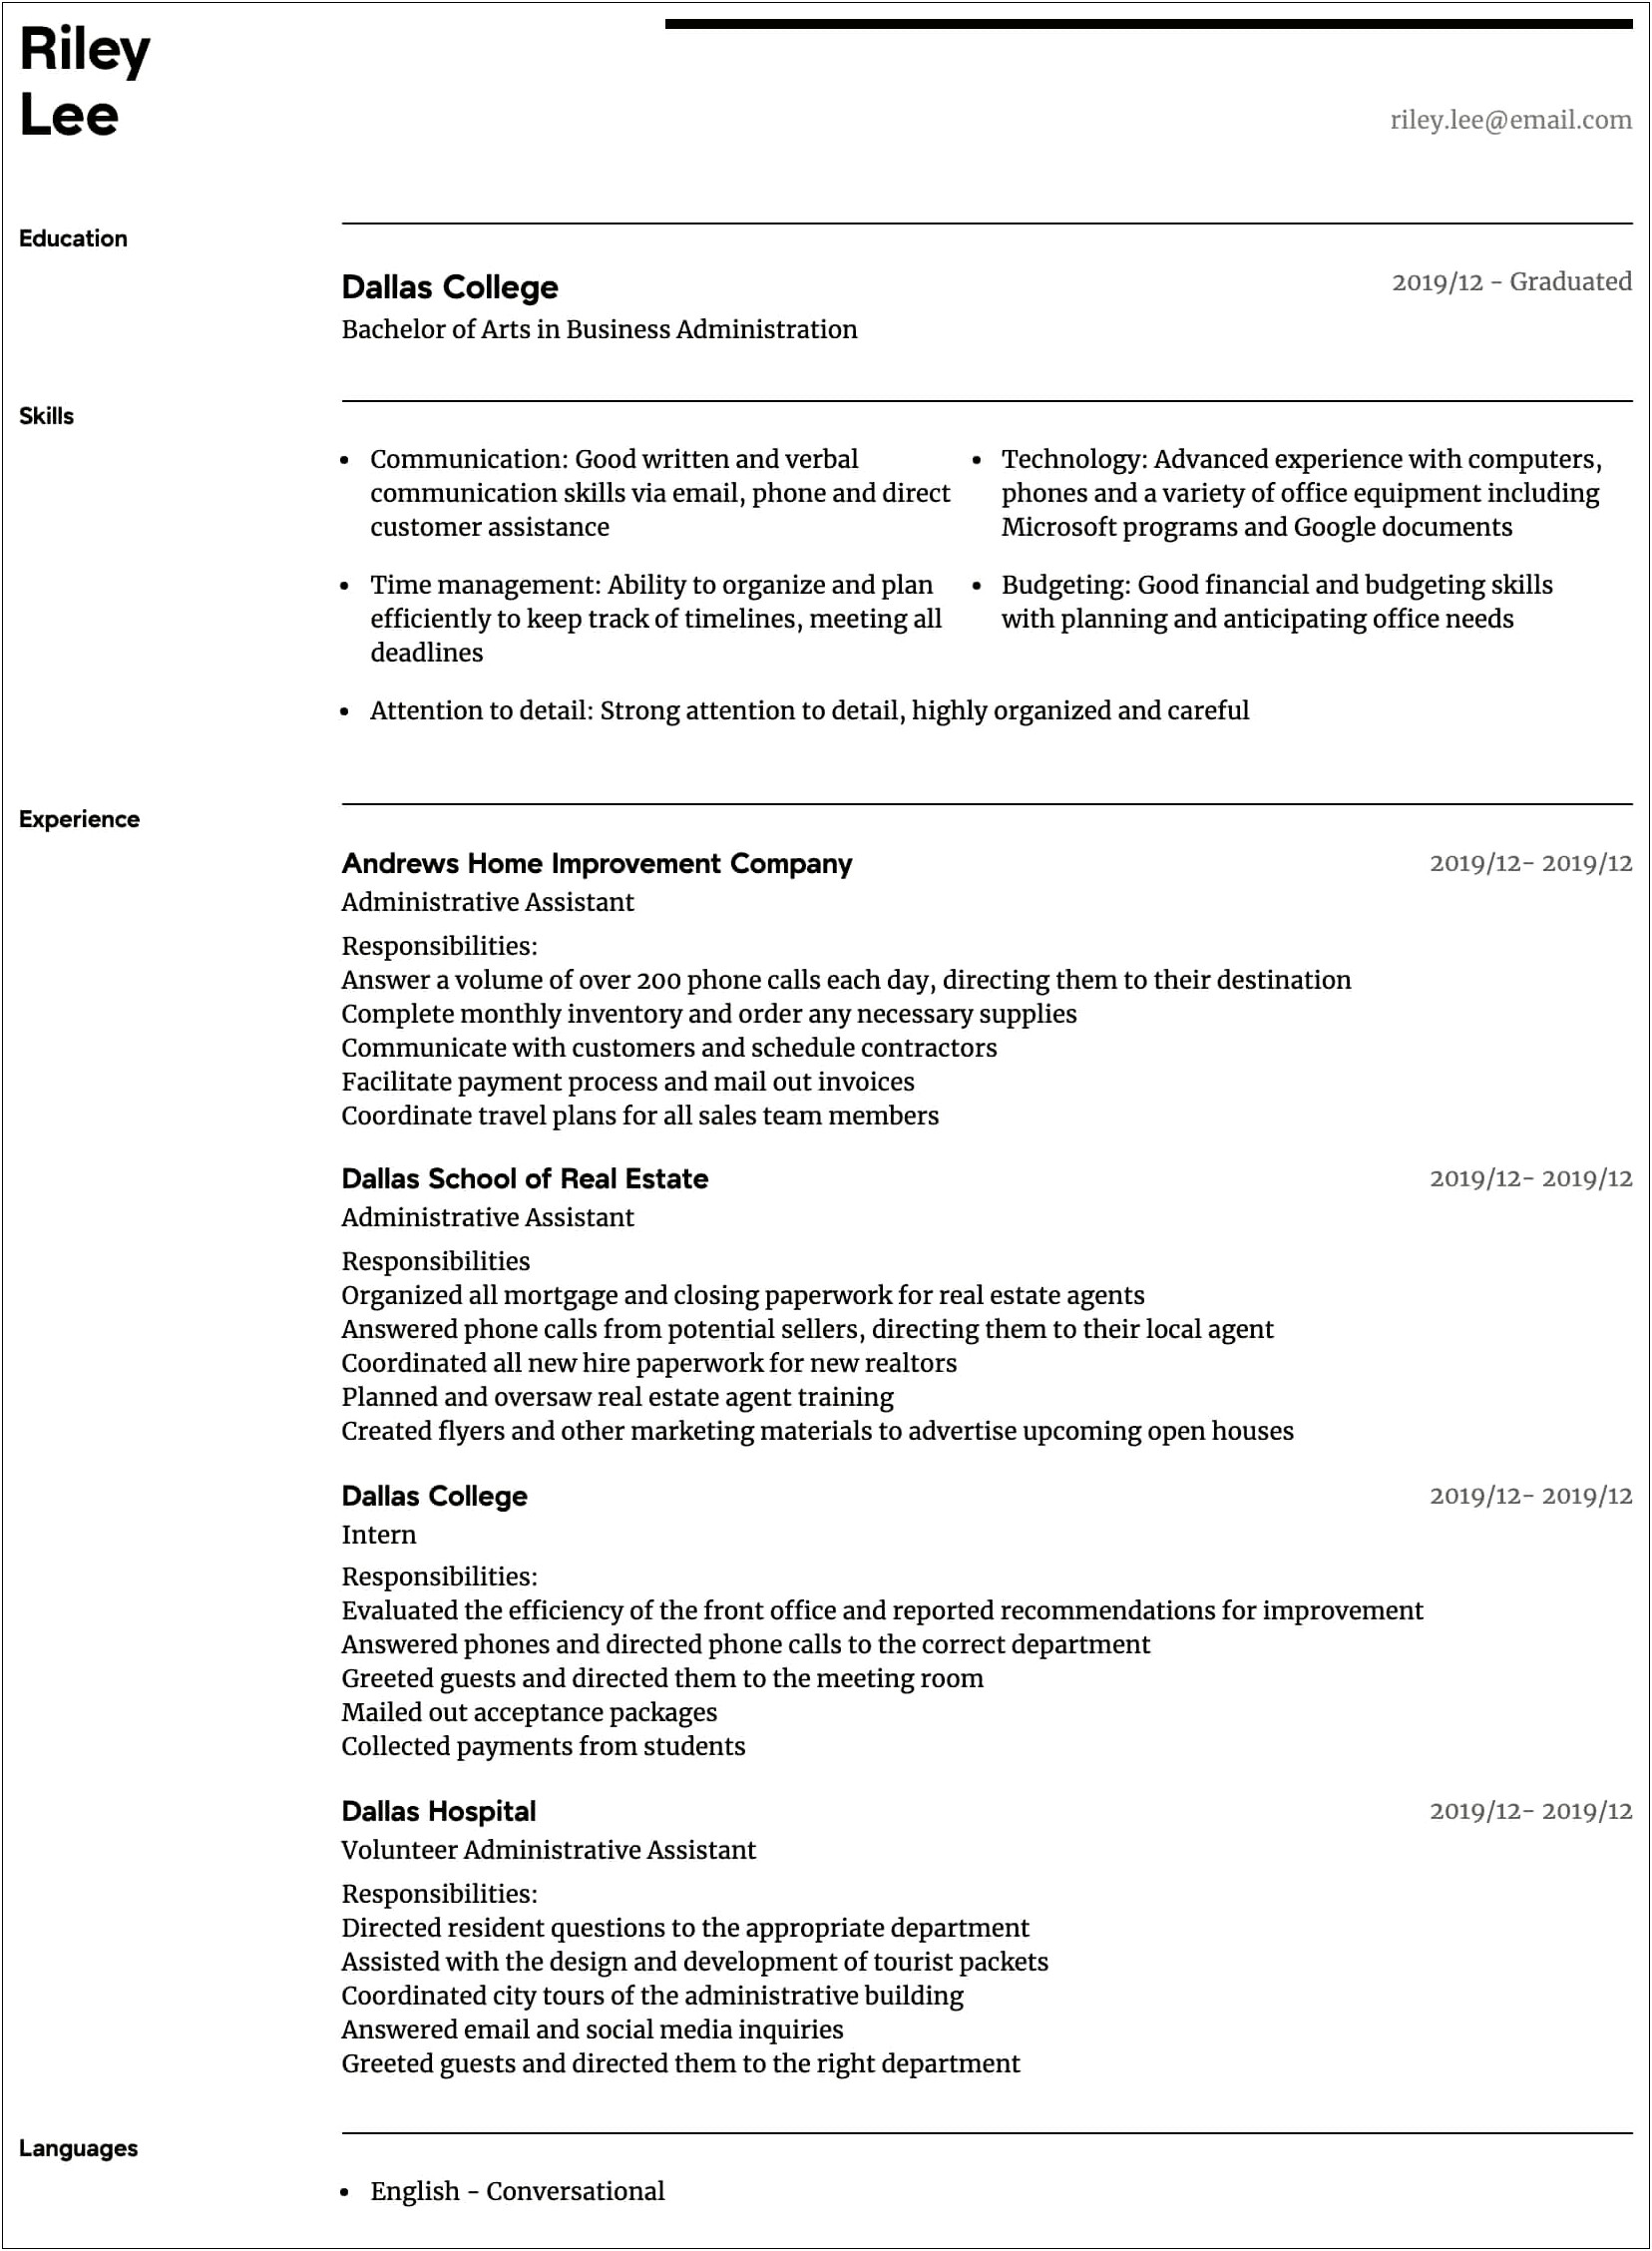 Resume Objectives For An Office Position